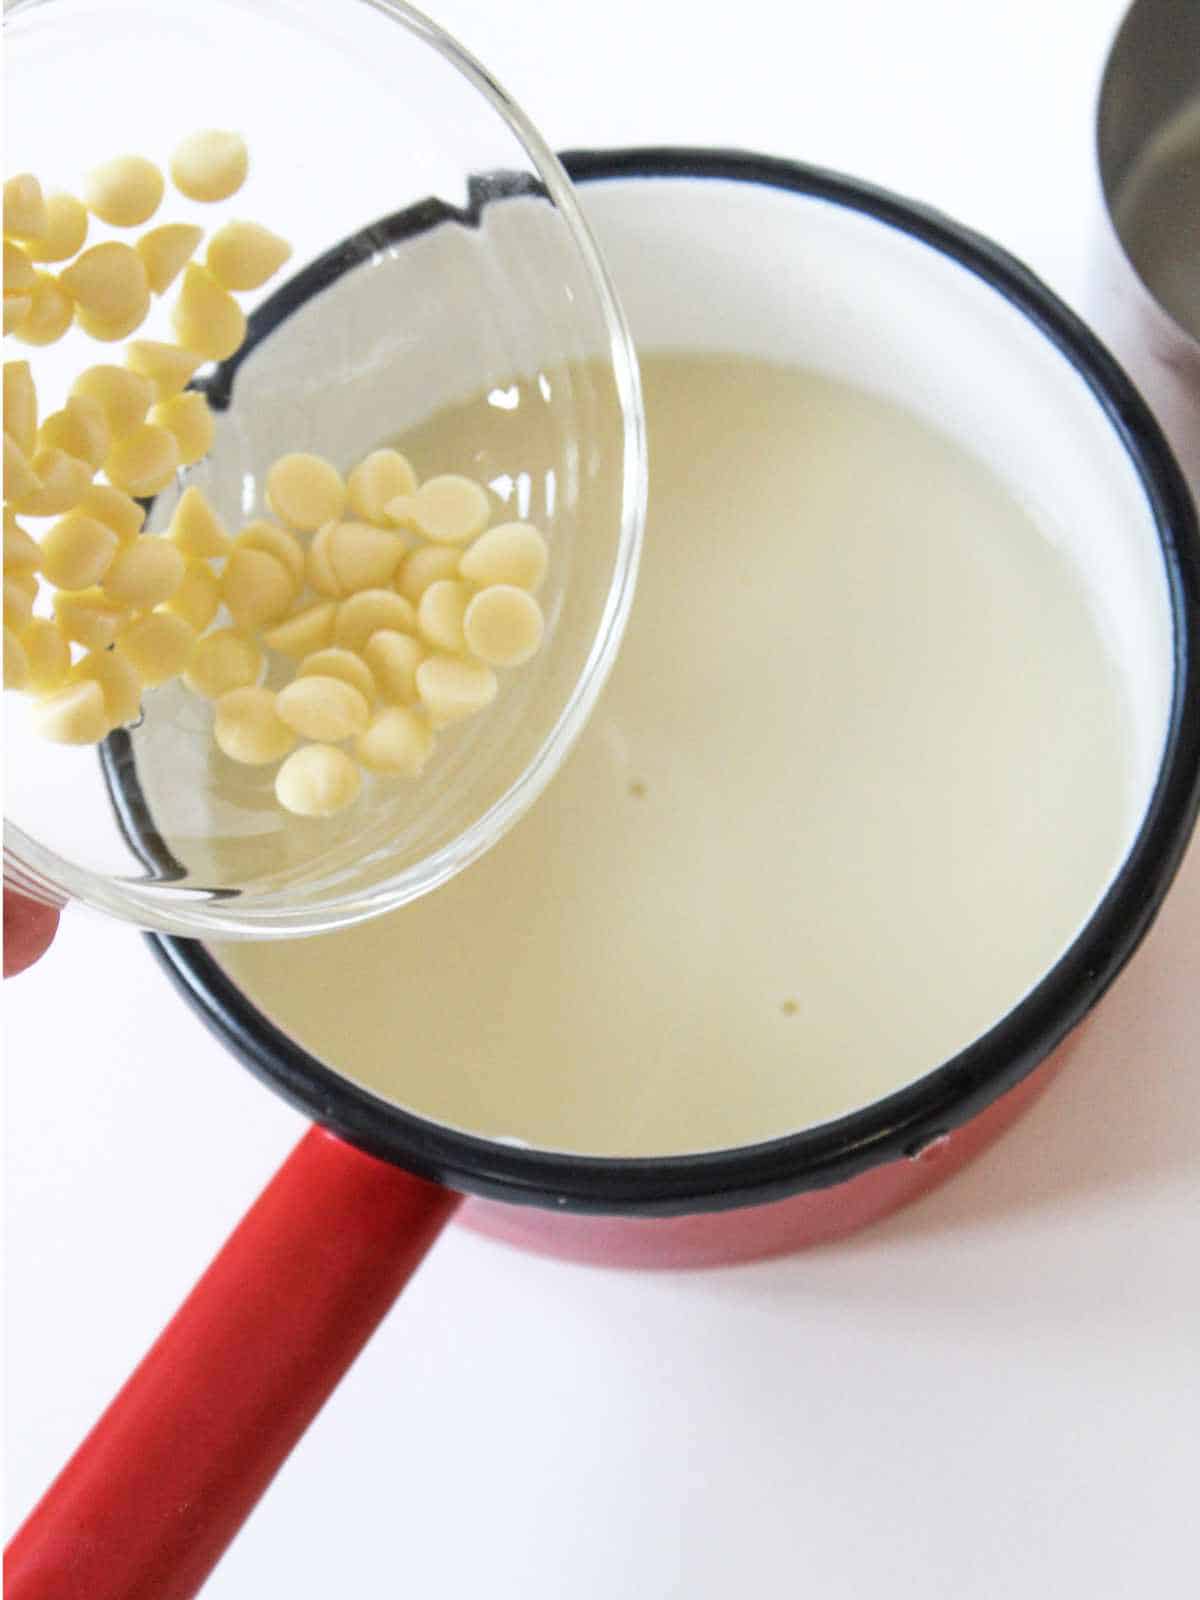 Adding white chocolate chips to a saucepan of milk.